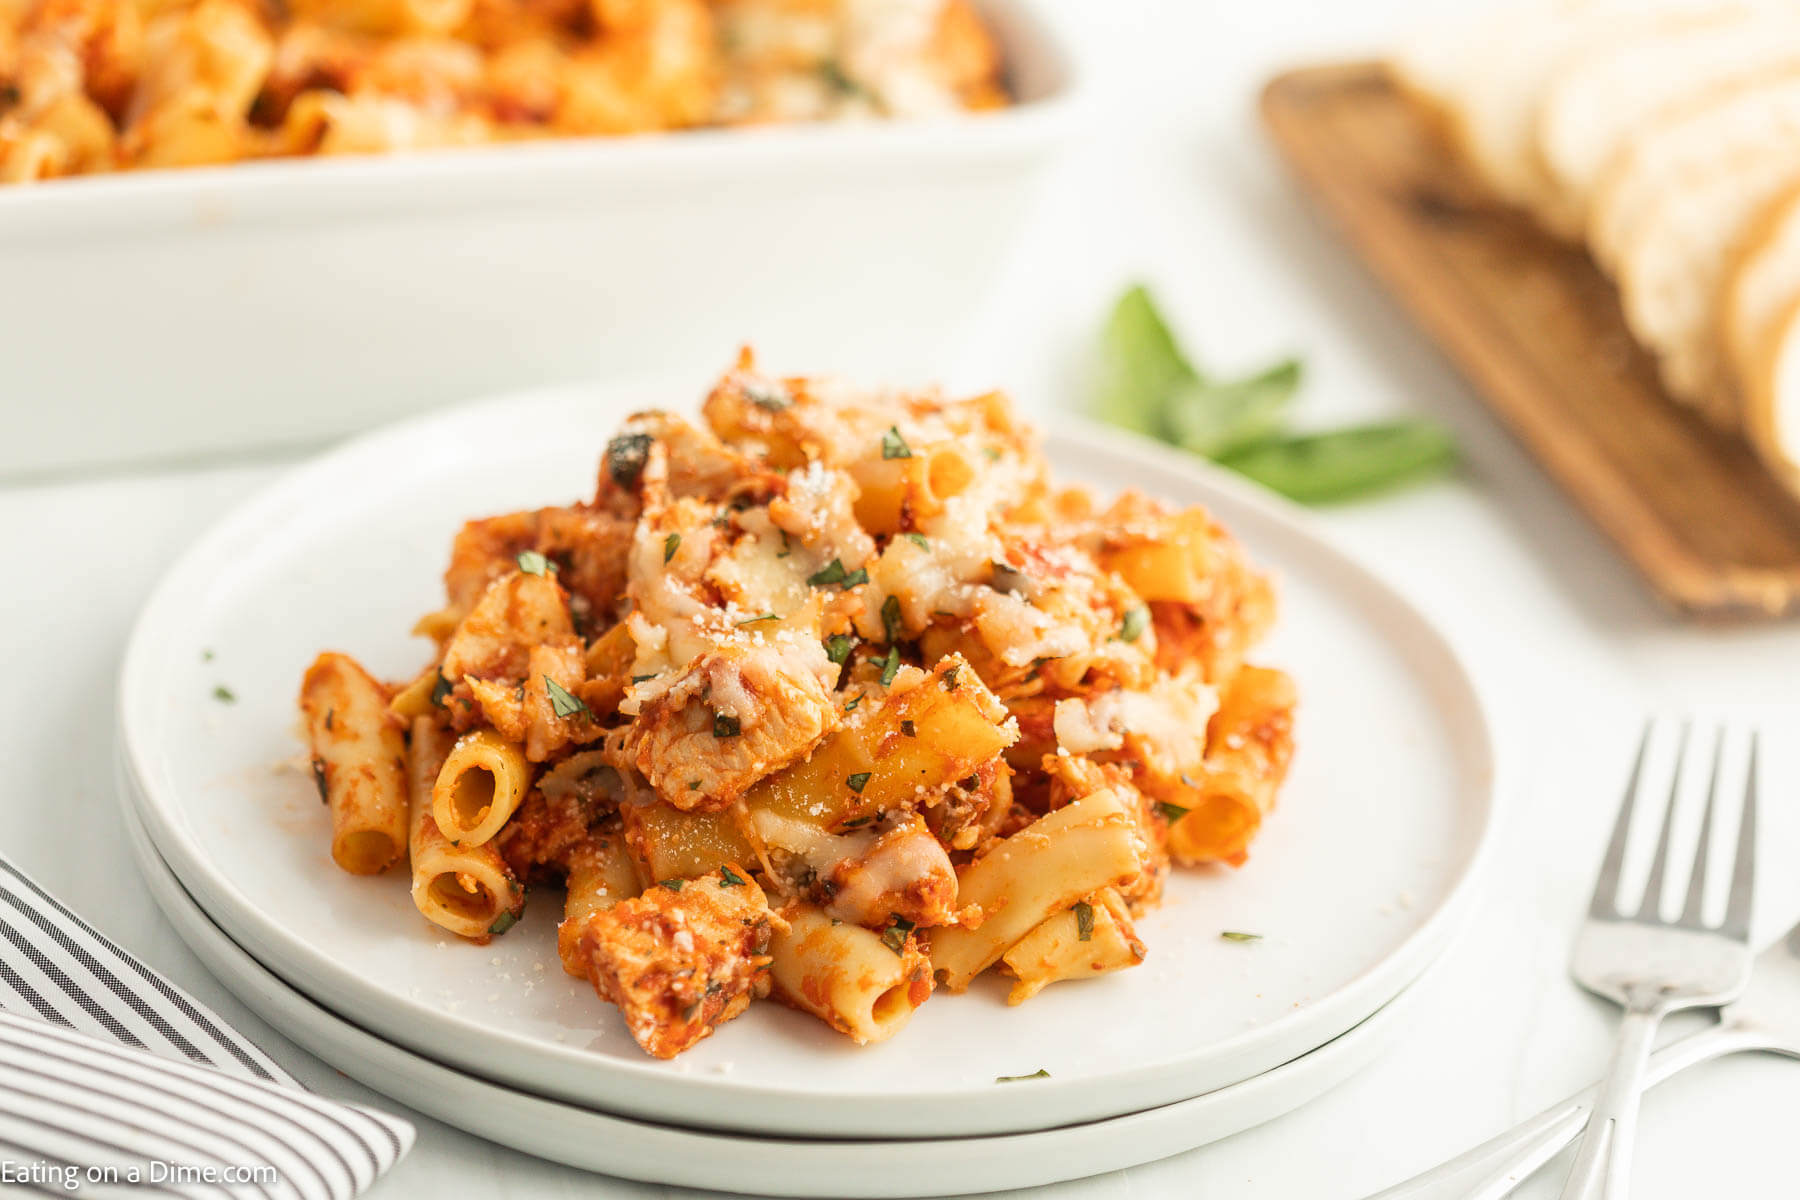 Baked Ziti with Chicken - Eating on a Dime